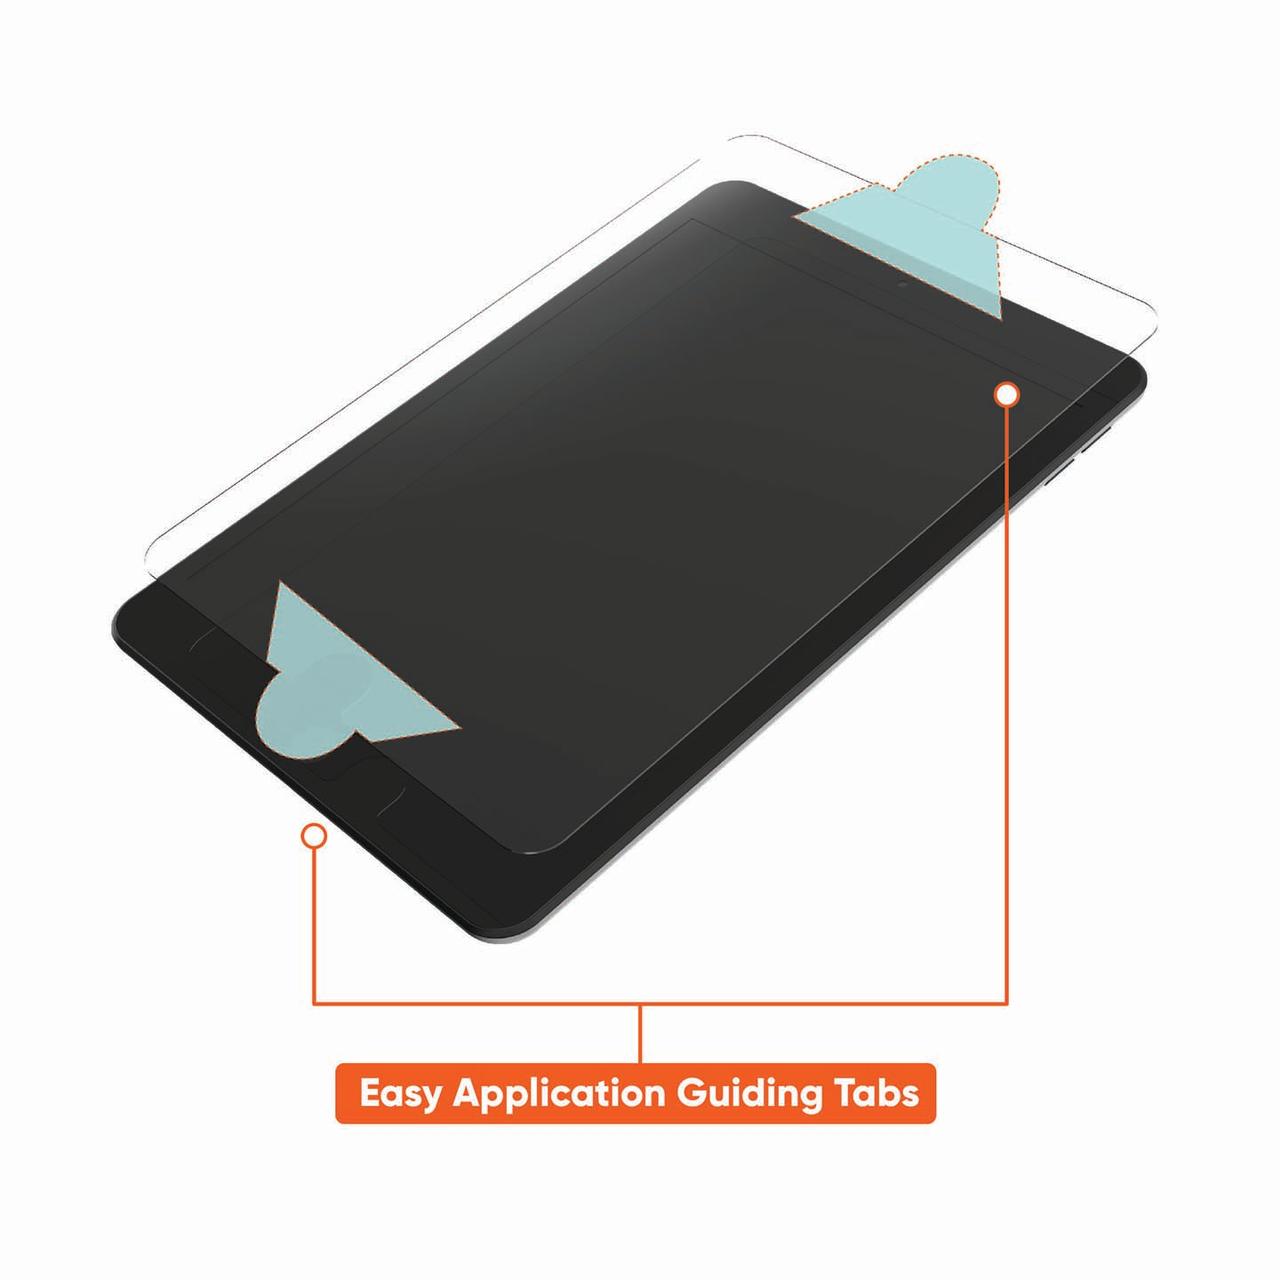 onn. Glass Screen Protector for iPad Mini (Generations 1/2/3/4/5) - image 4 of 5